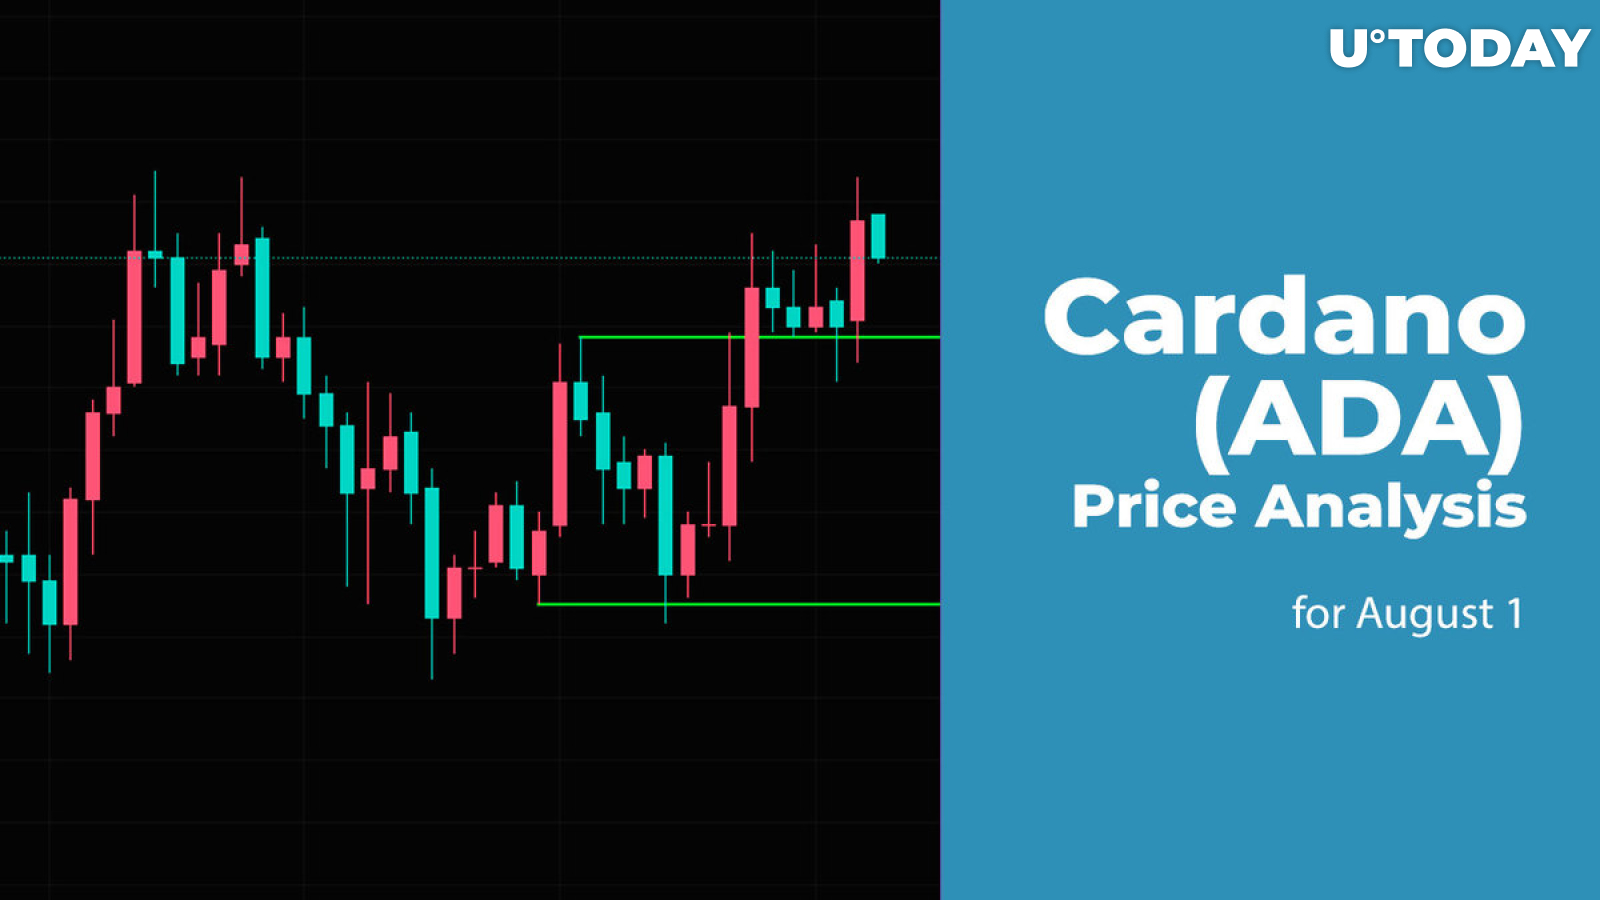 Cardano (ADA) Price Analysis for August 1